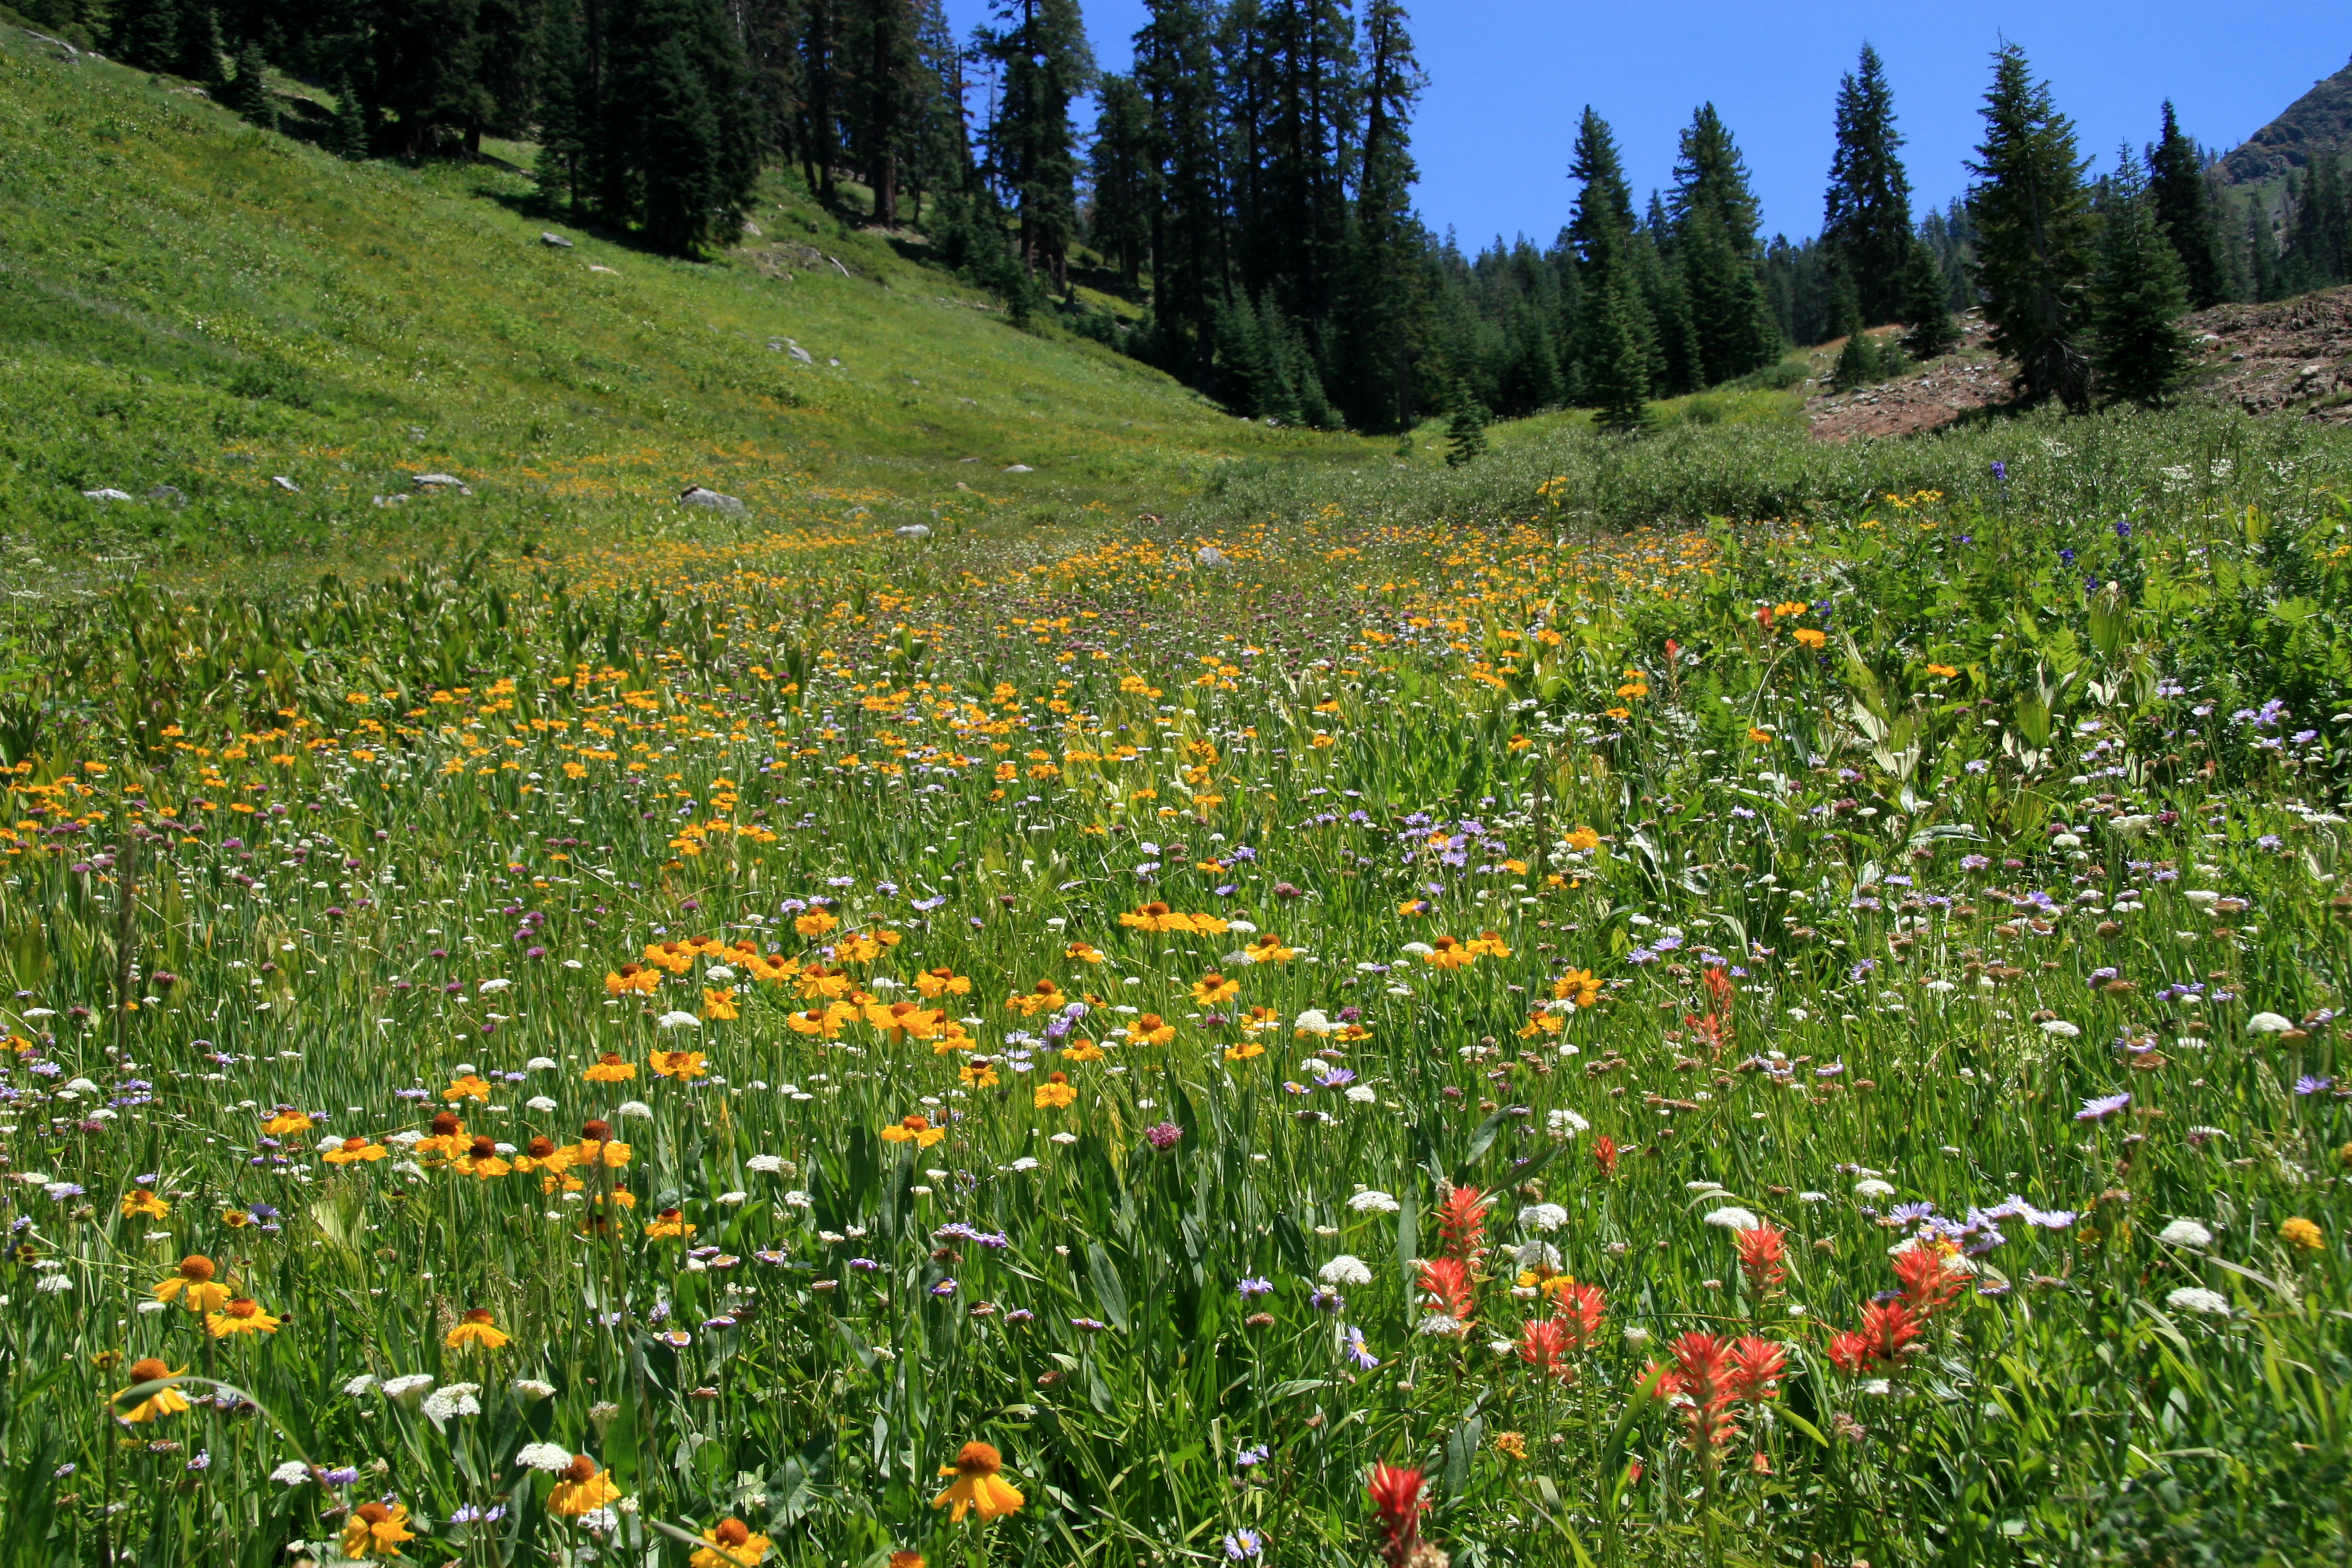 File:Up Flower Meadow Mineral King.jpg - Wikimedia Commons